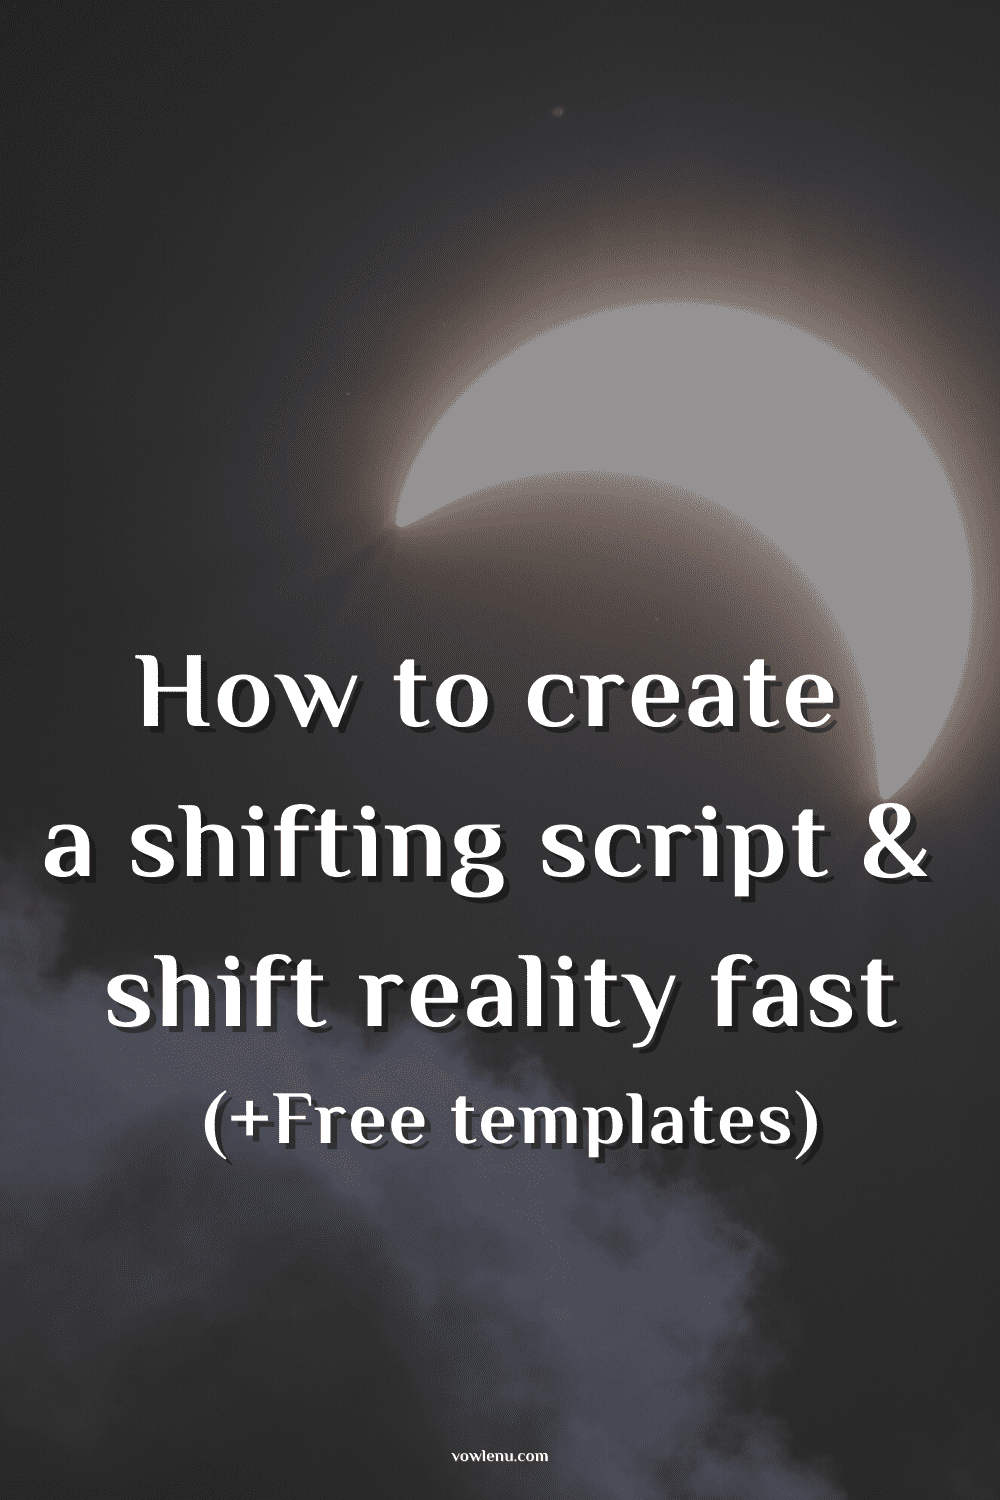 How to create a shifting script & shift reality fast (+Free templates)